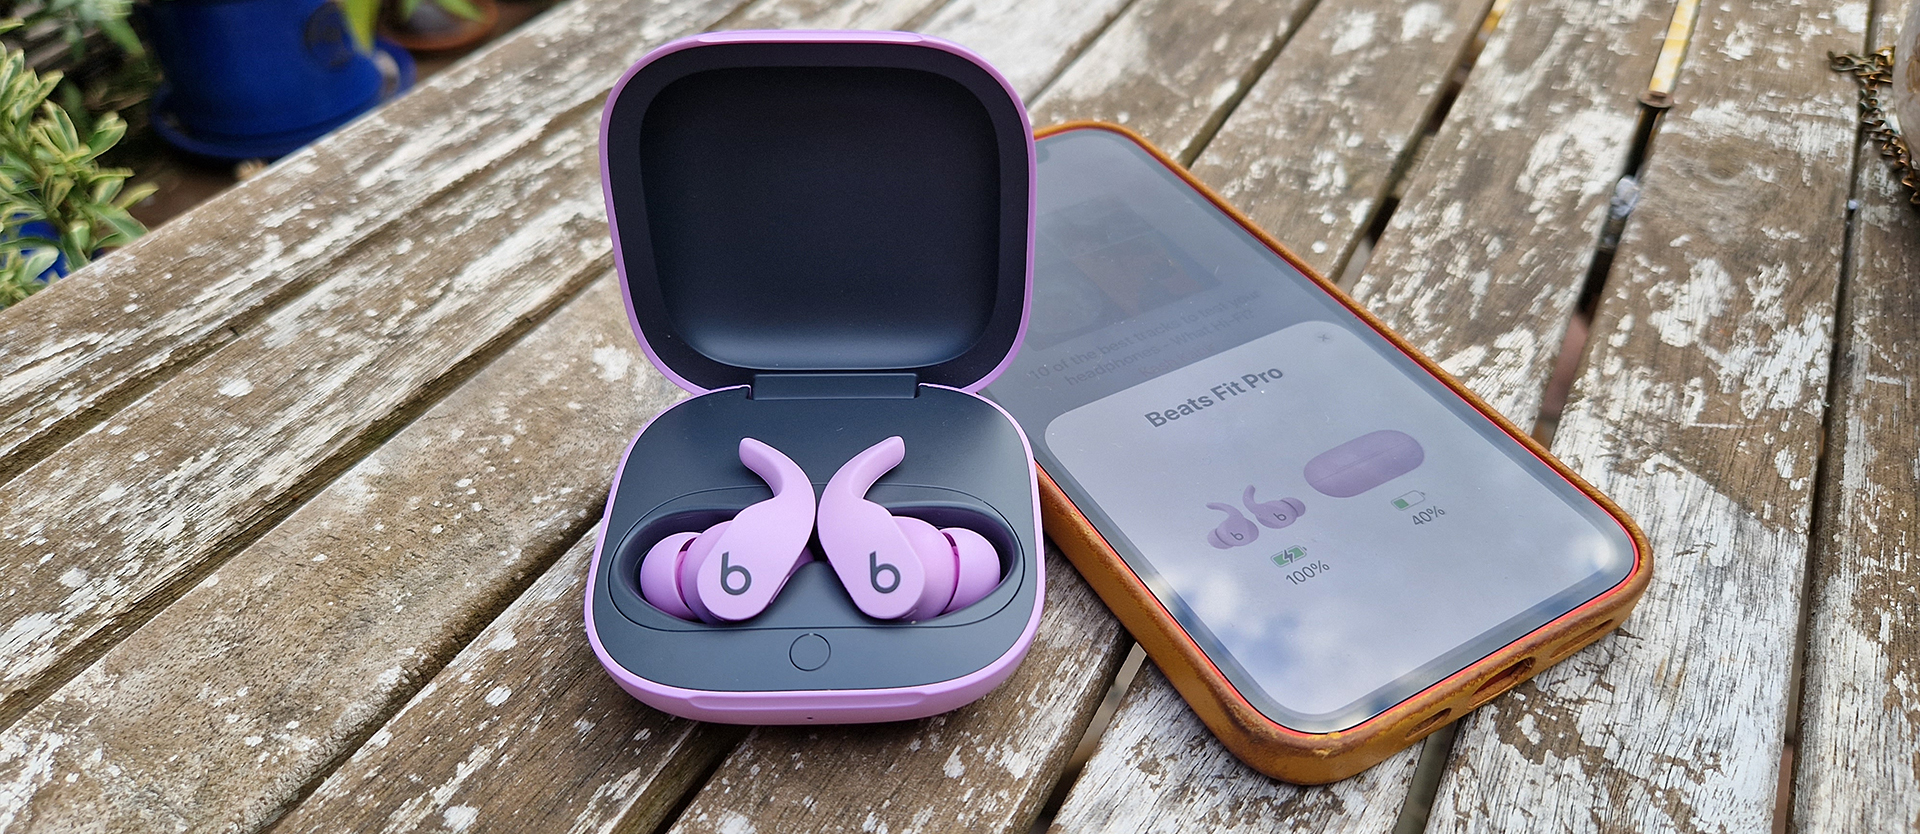 genuine What review: earbuds Hi-Fi? alternative | a Beats Fit AirPods Apple Pro